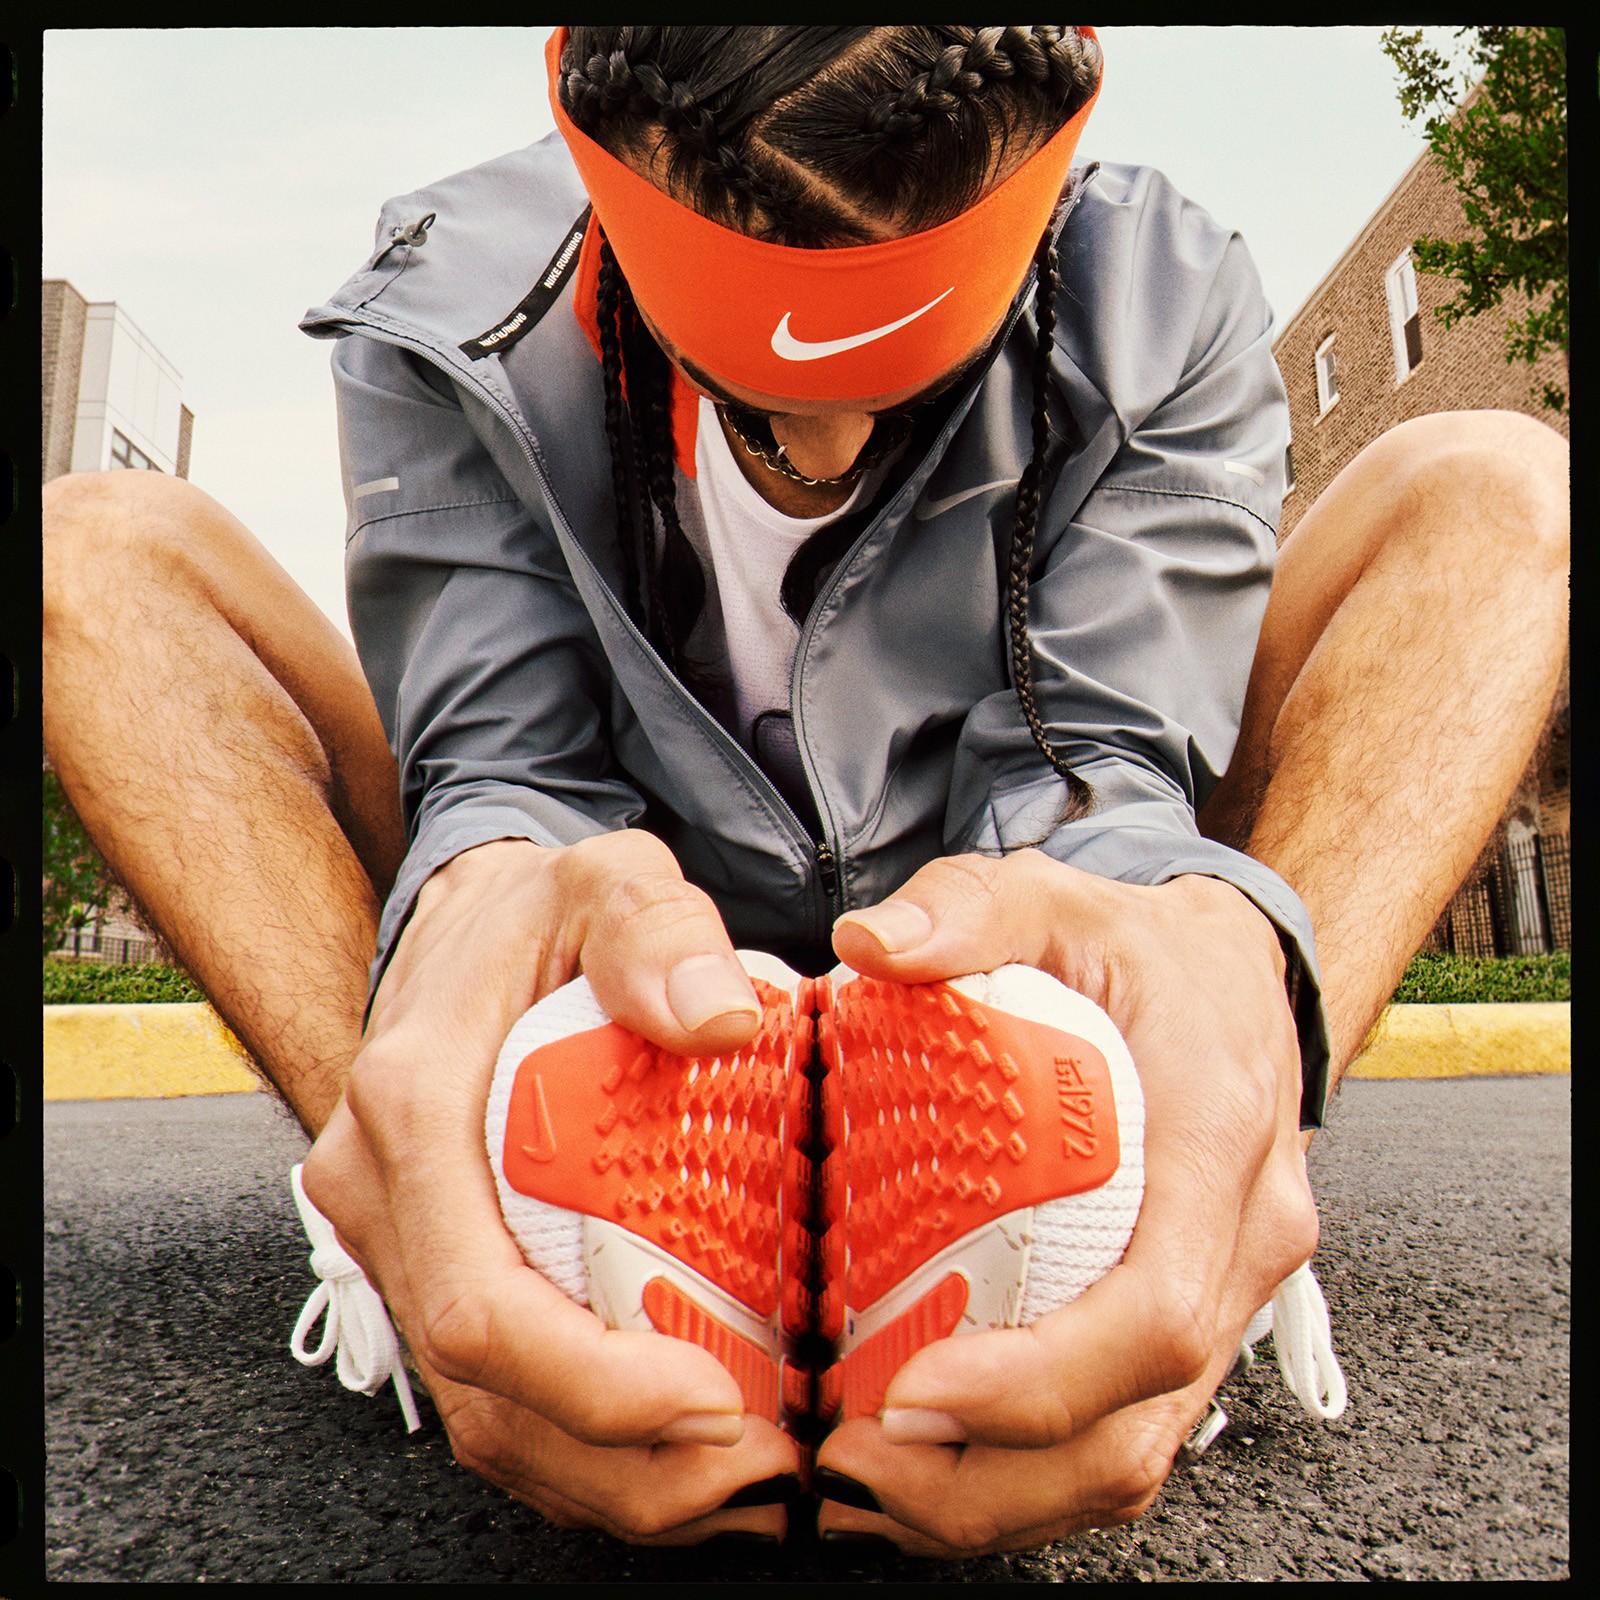 Man stretching in street in cobblers pose head down. He has geometric, parting and braiding in hair with orange nike headband.